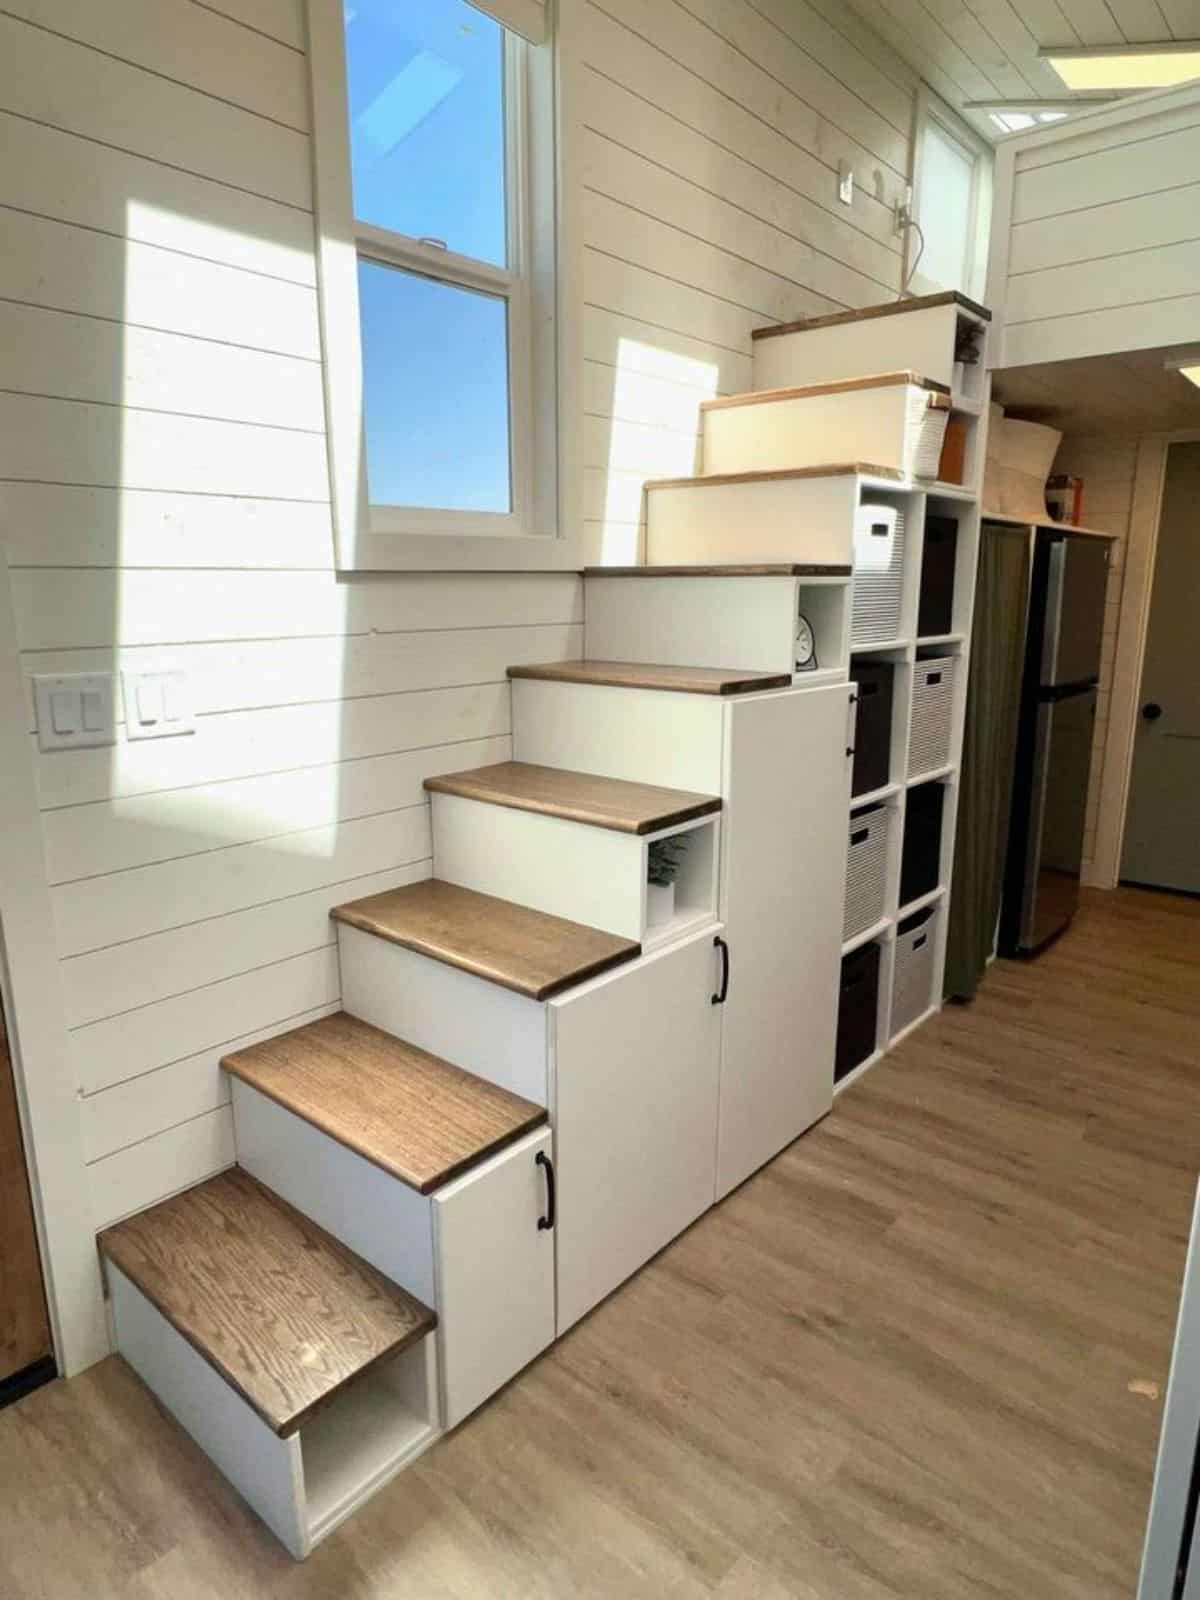 multi purpose stairs leading to the loft bedroom of 28' luxury tiny home